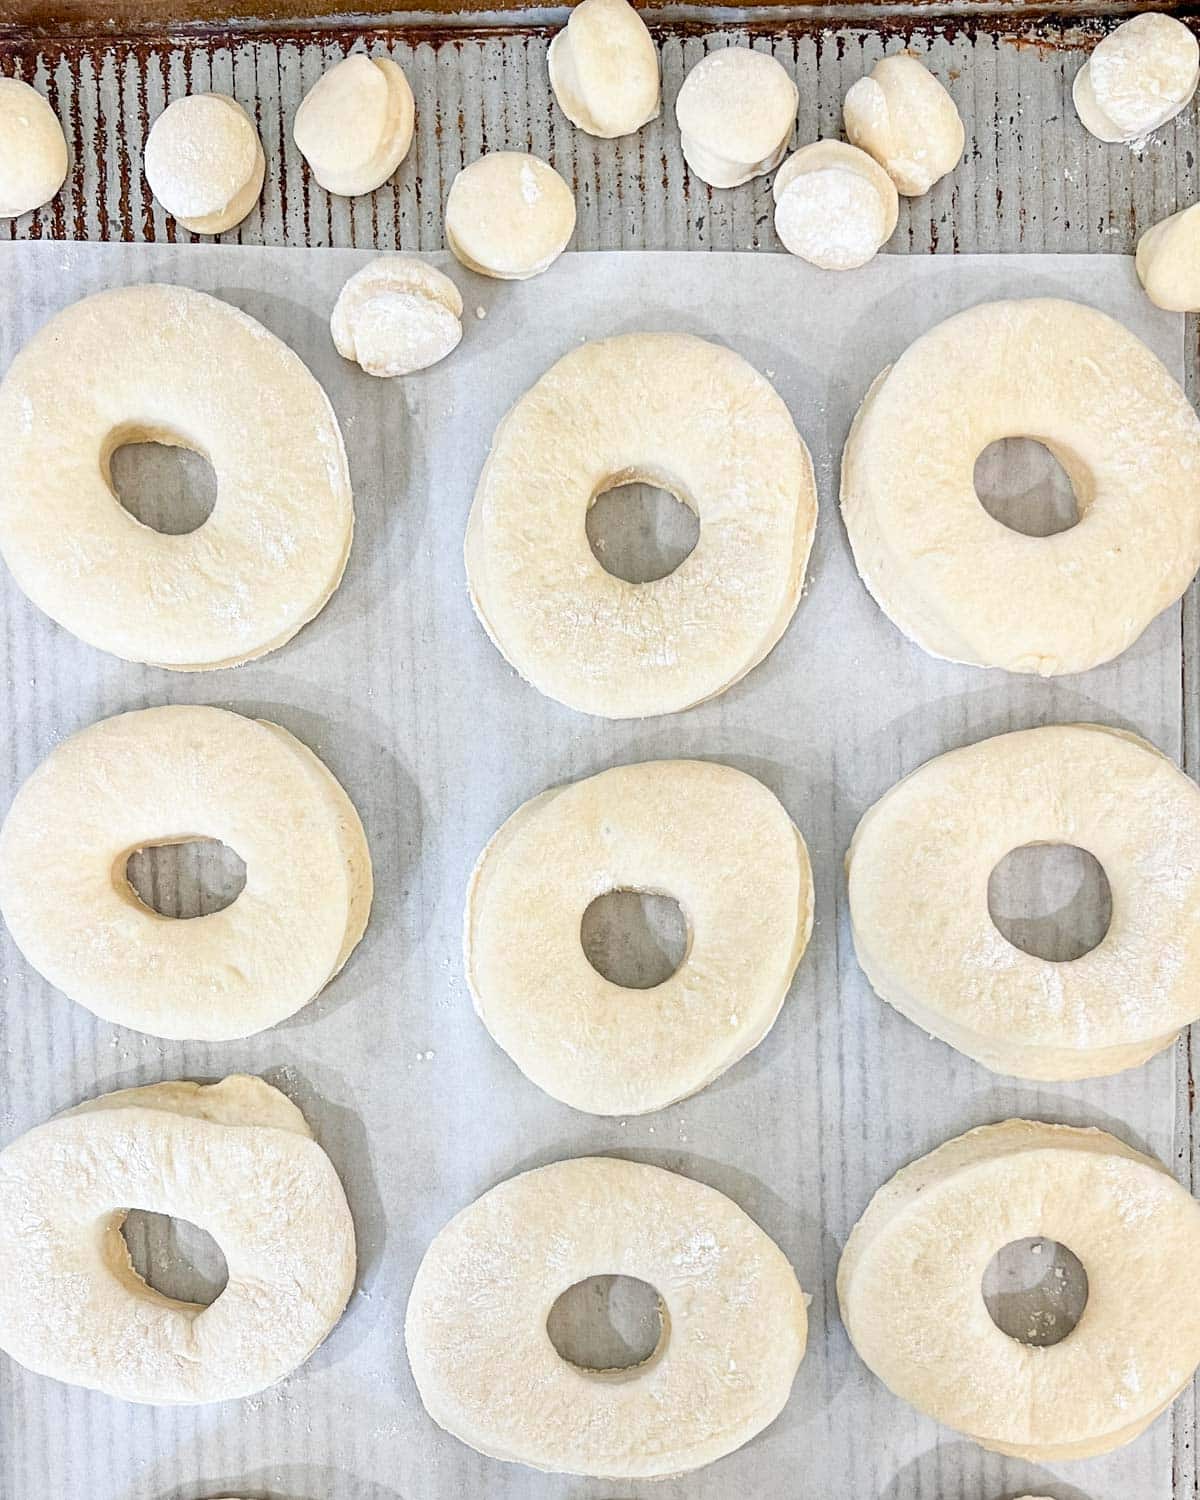 unbaked donuts cut on a baking sheet with donut holes at the top of the pan